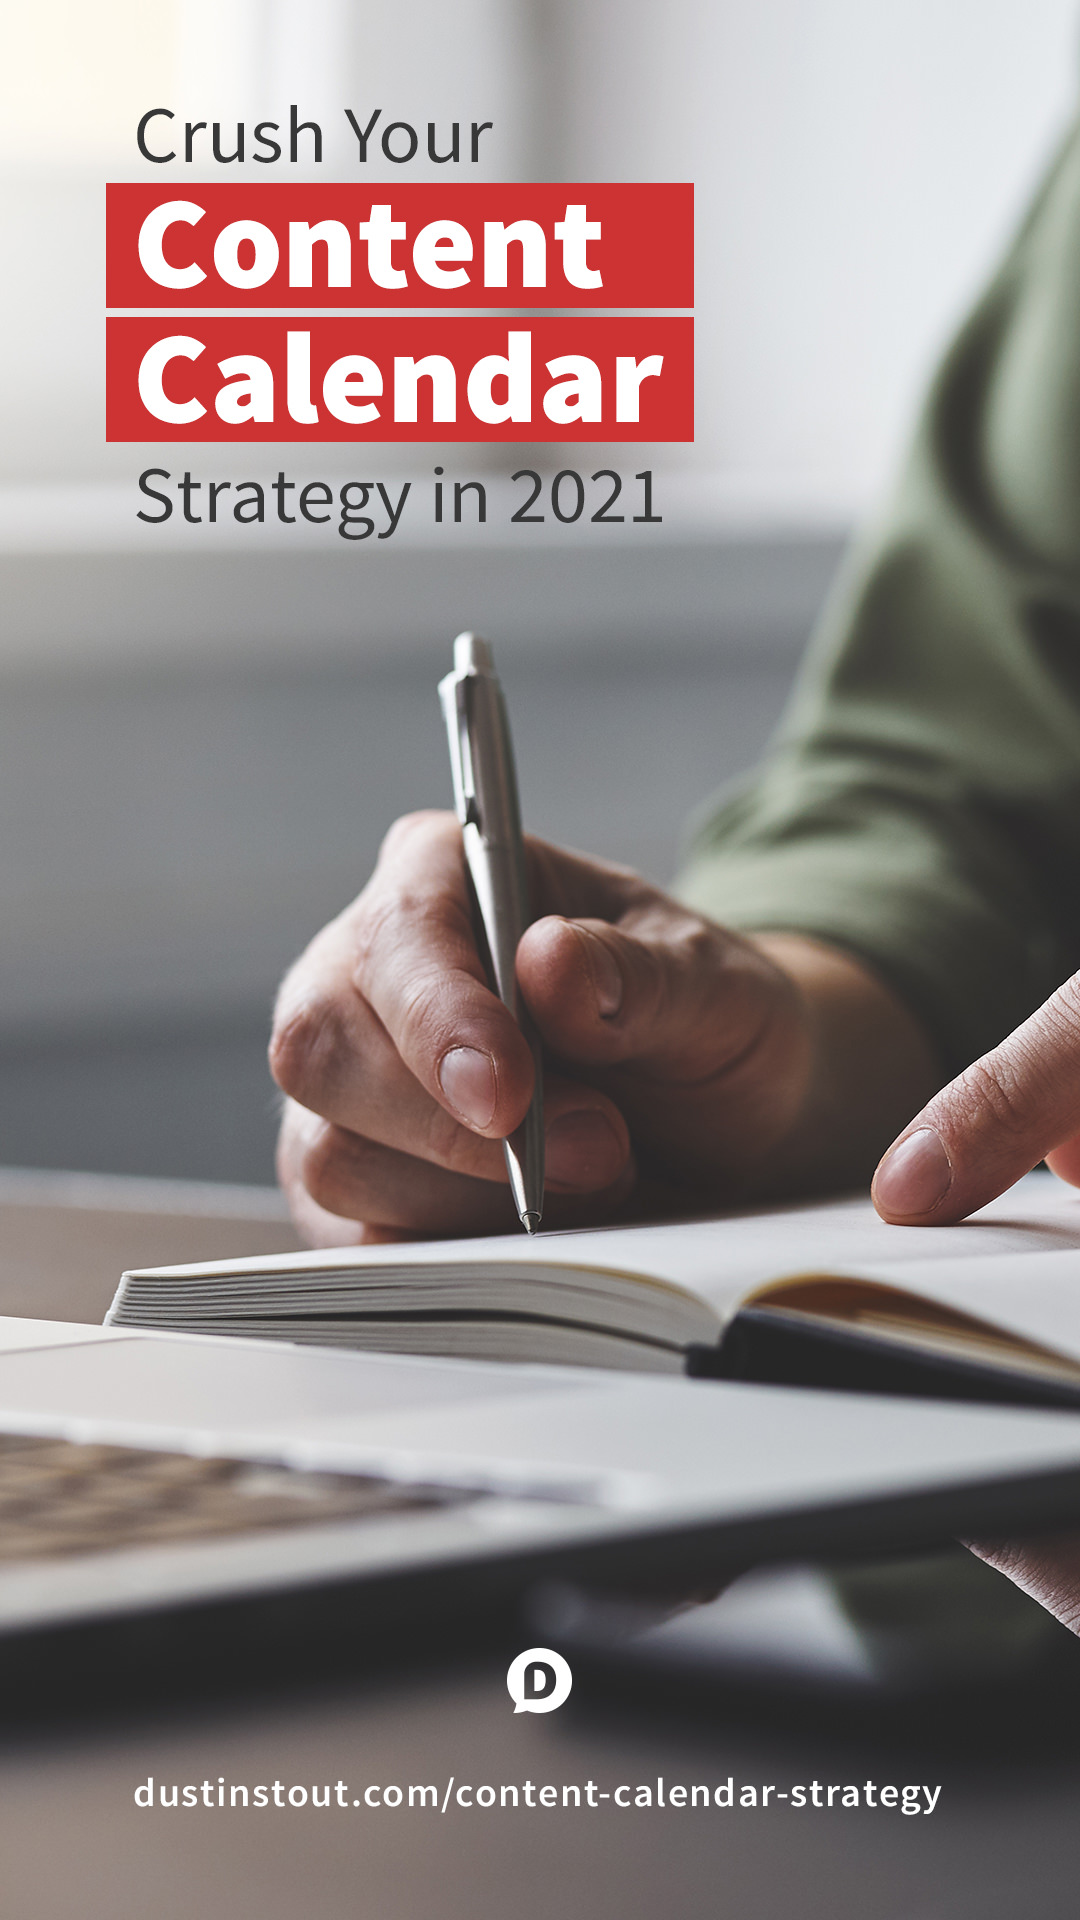 Your Content Calendar Strategy for 2021: Brilliantly Simple to Use